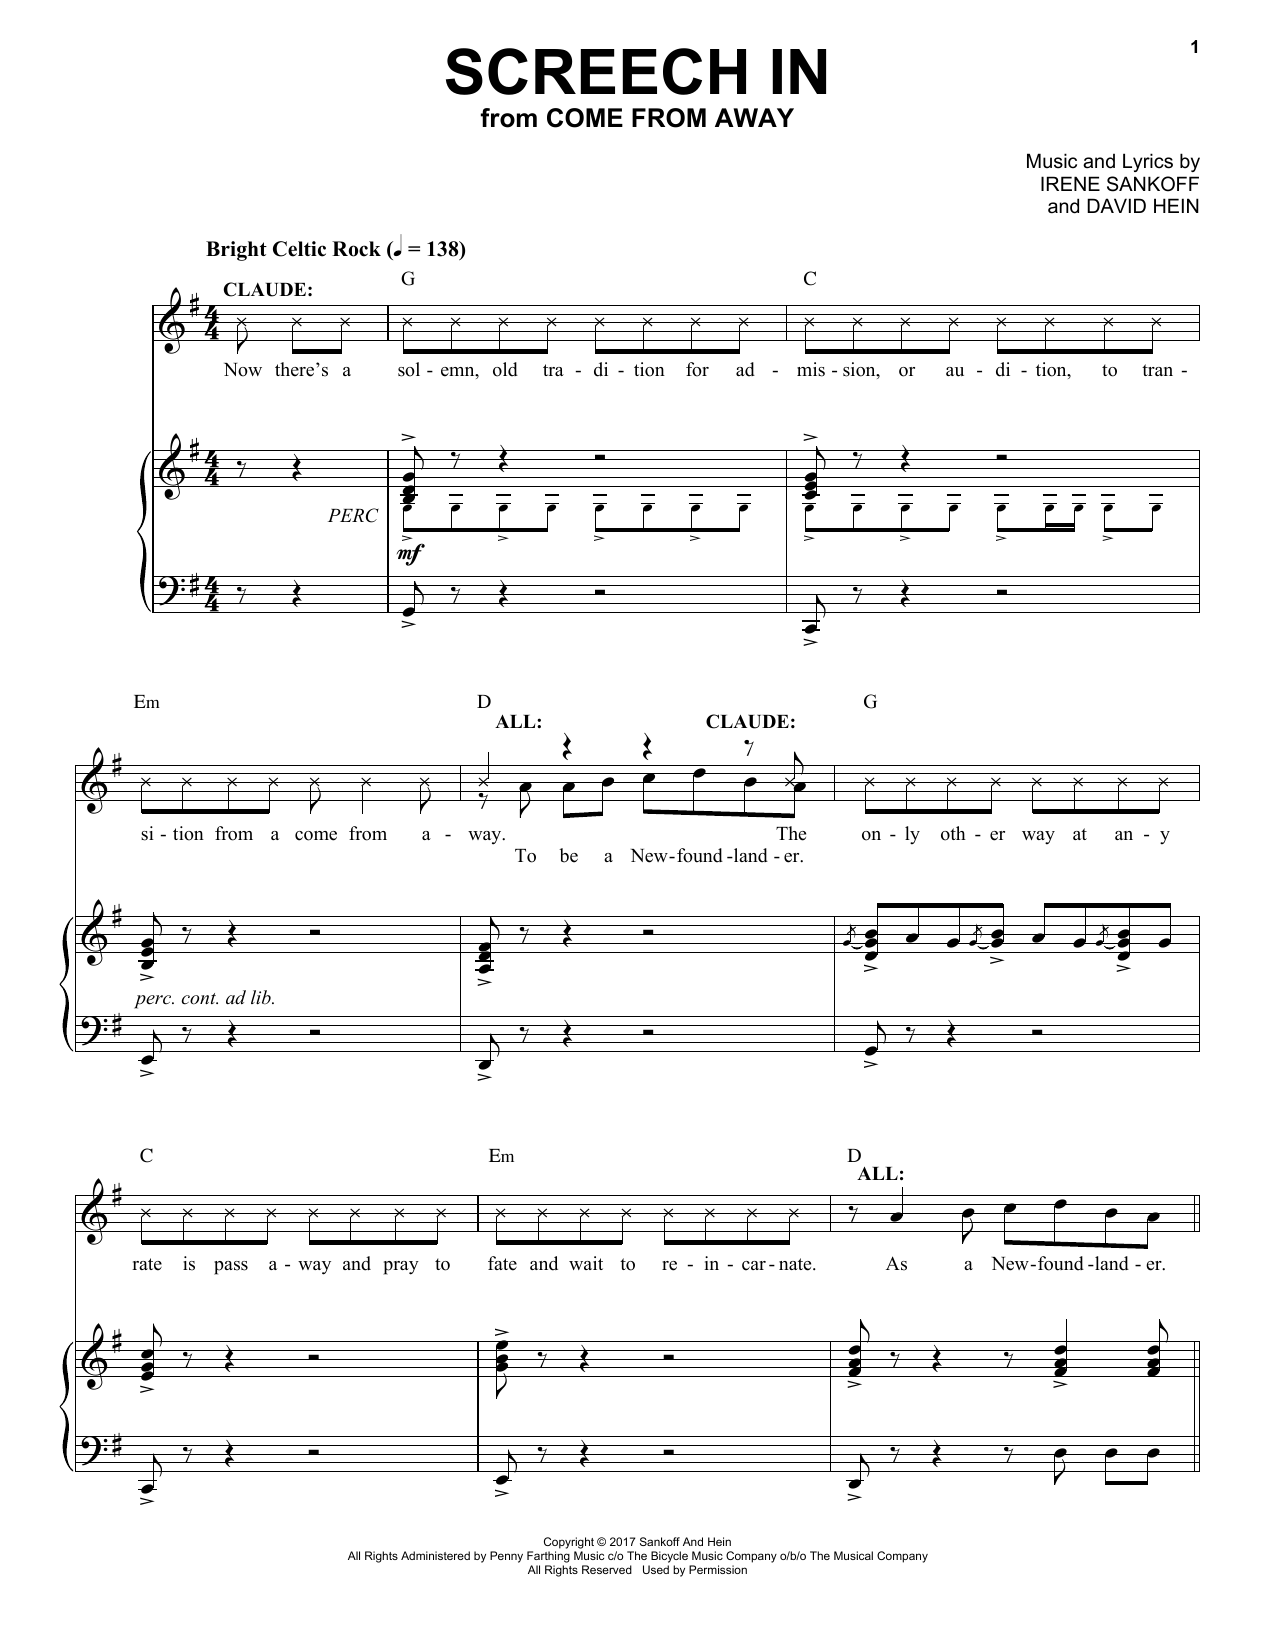 Download Irene Sankoff & David Hein Screech In (from Come from Away) Sheet Music